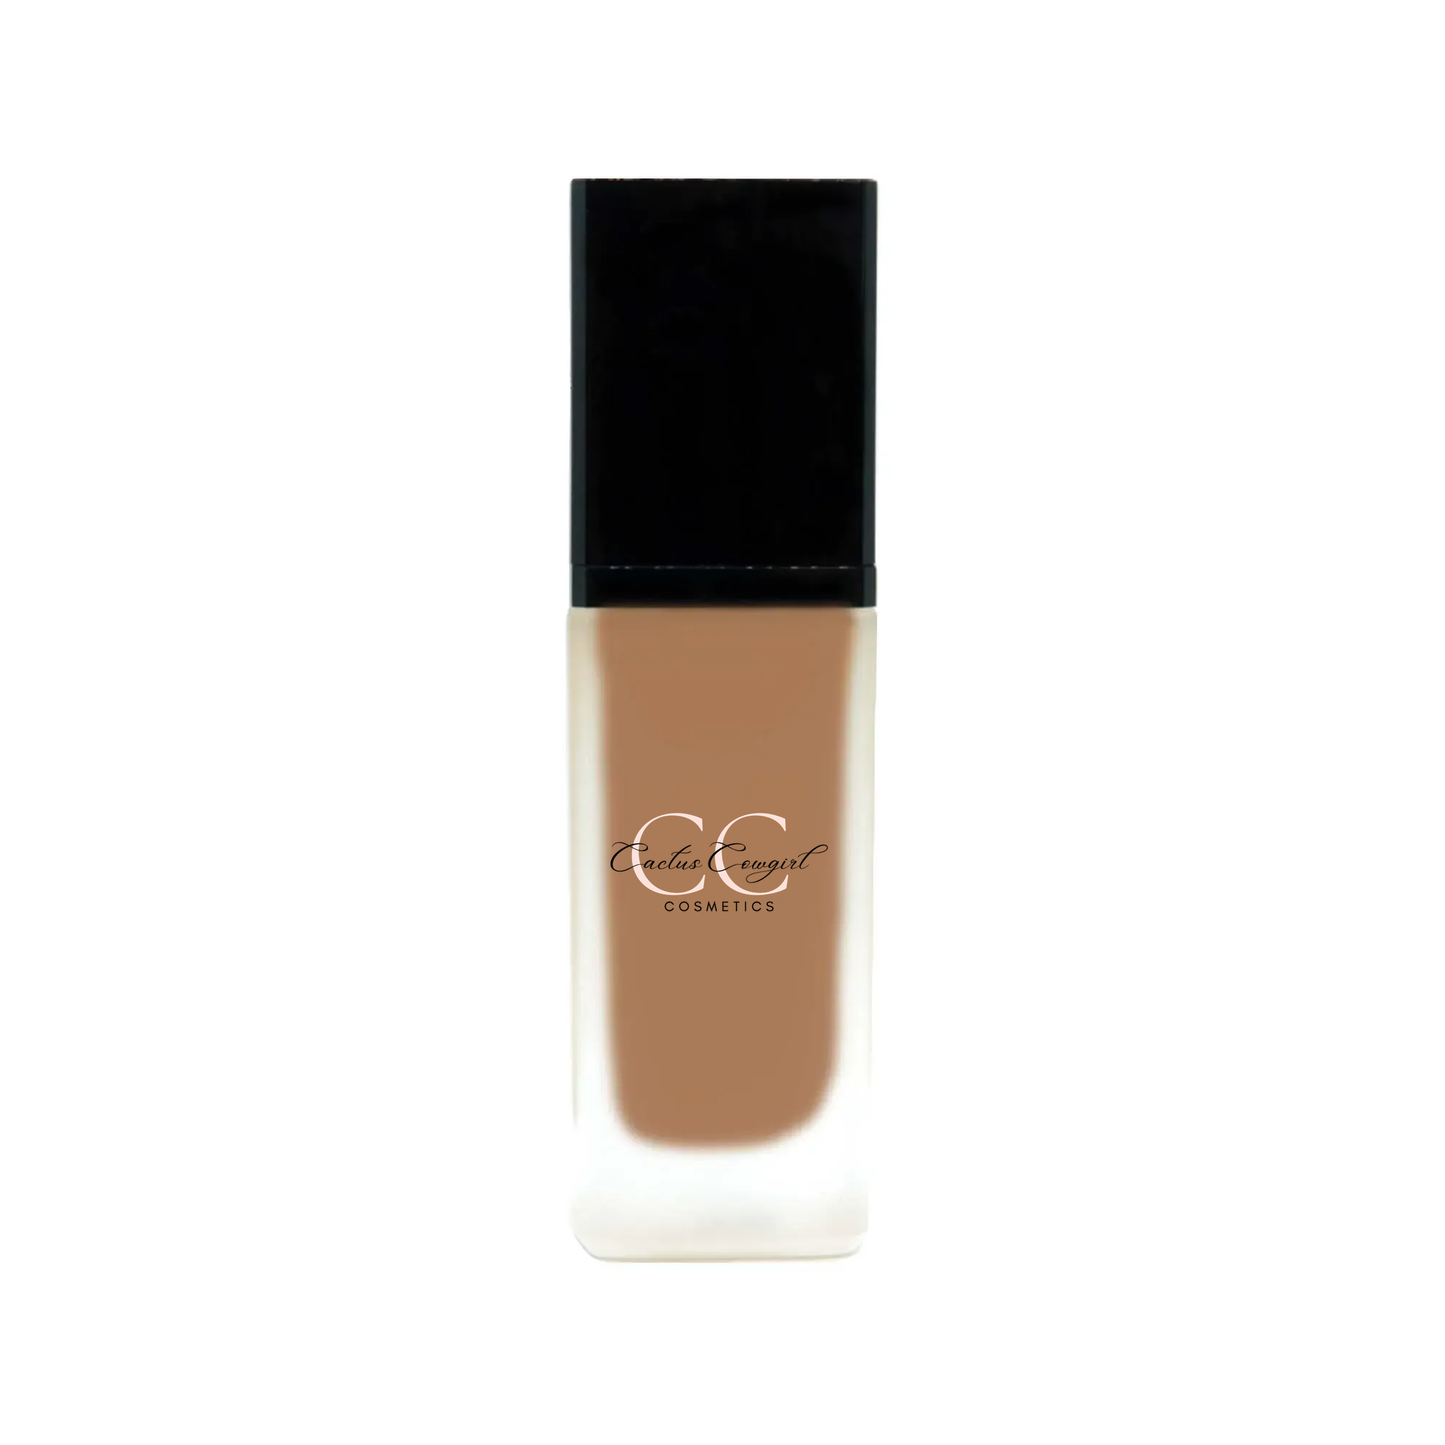 Foundation with SPF - Rich Caramel - Cactus Cowgirl